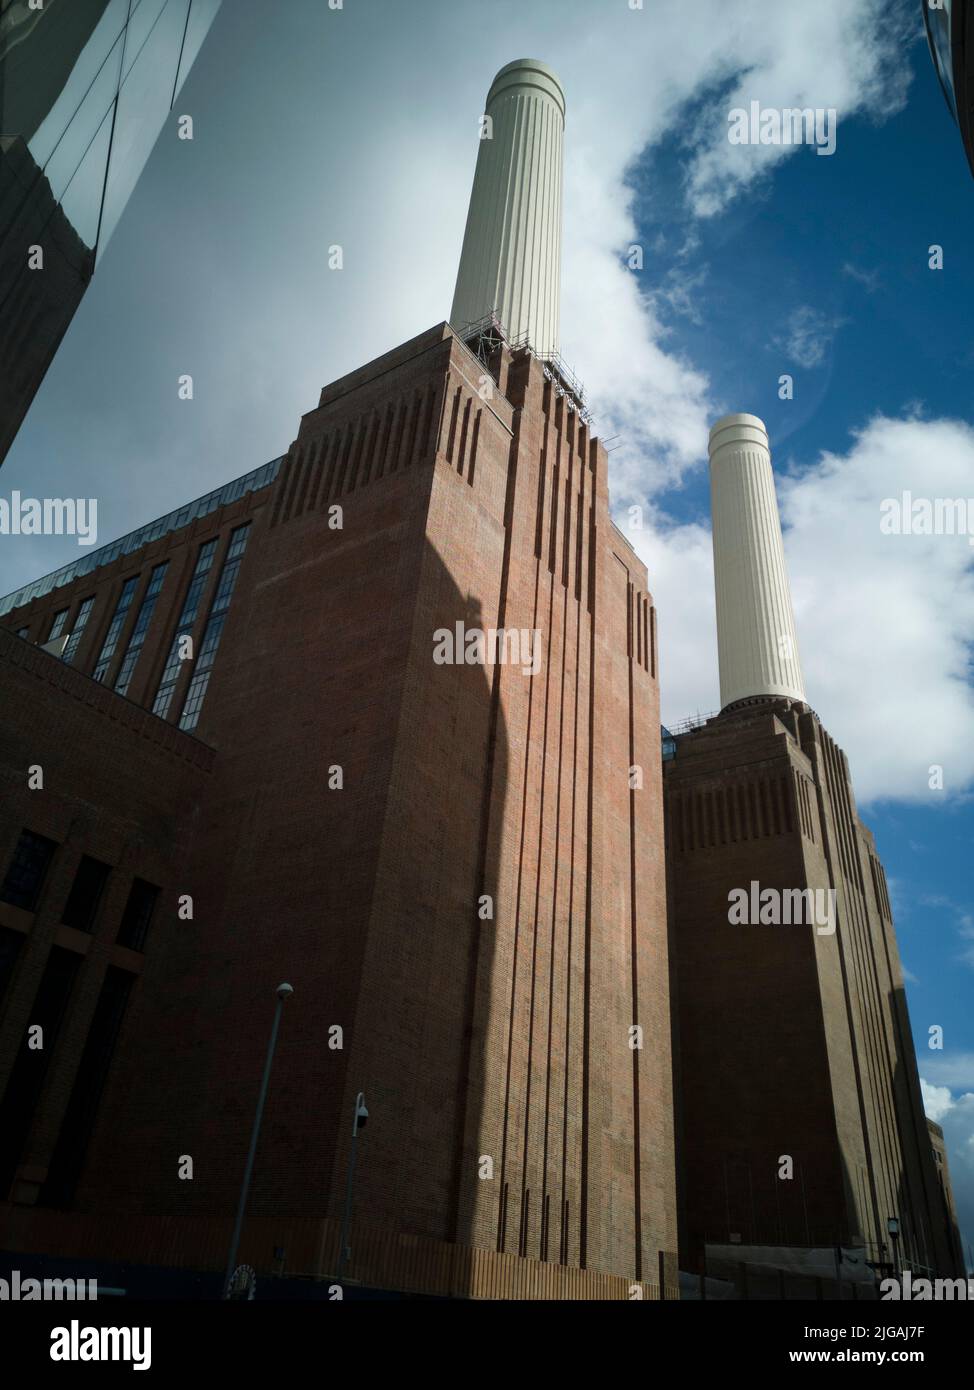 Around Battersea Power Station, London, UK, Oct 2021. The reconditioned towers of the now repurposed Battersea Power Station. Stock Photo